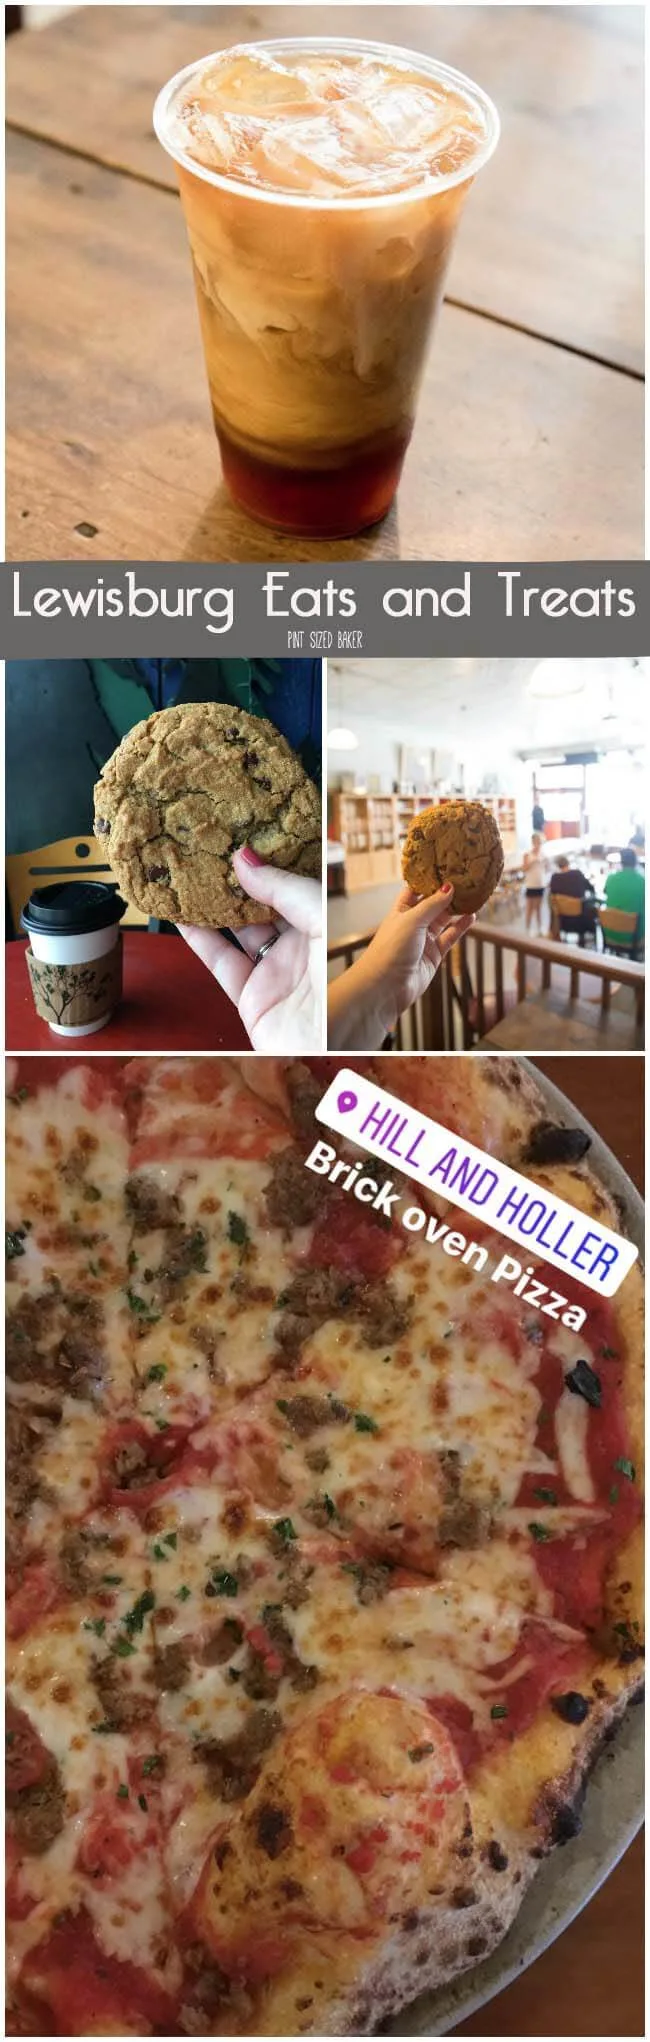 Relax those tired legs with a brick oven pizza and a cold beer. Lewisburg, WV has quite the selection of quaint restaurants and coffee shops.